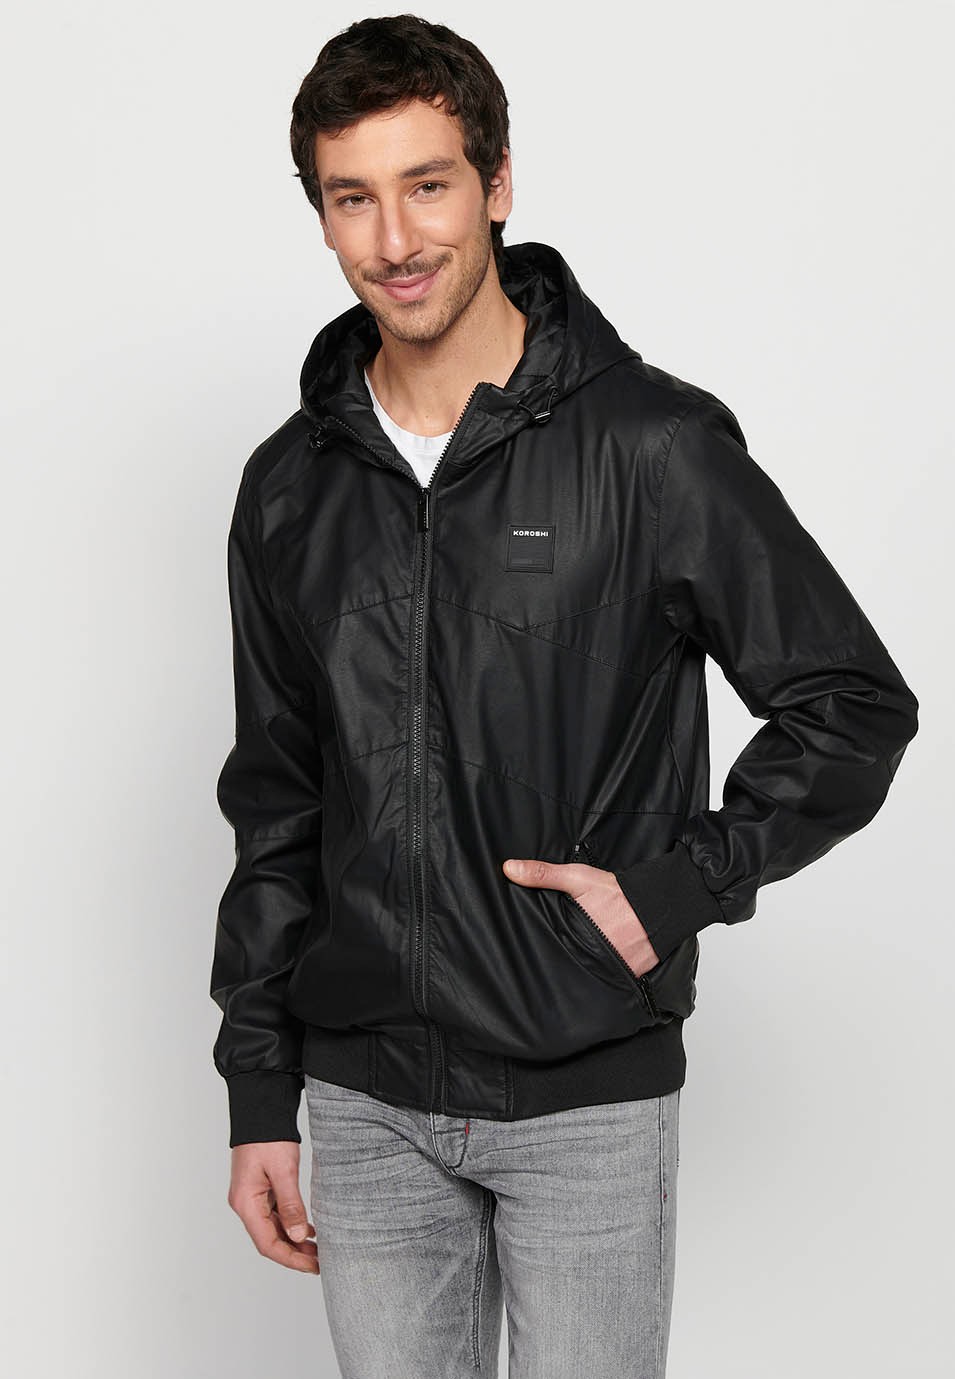 Leather-effect jacket with front zipper closure and hooded collar in black for Men